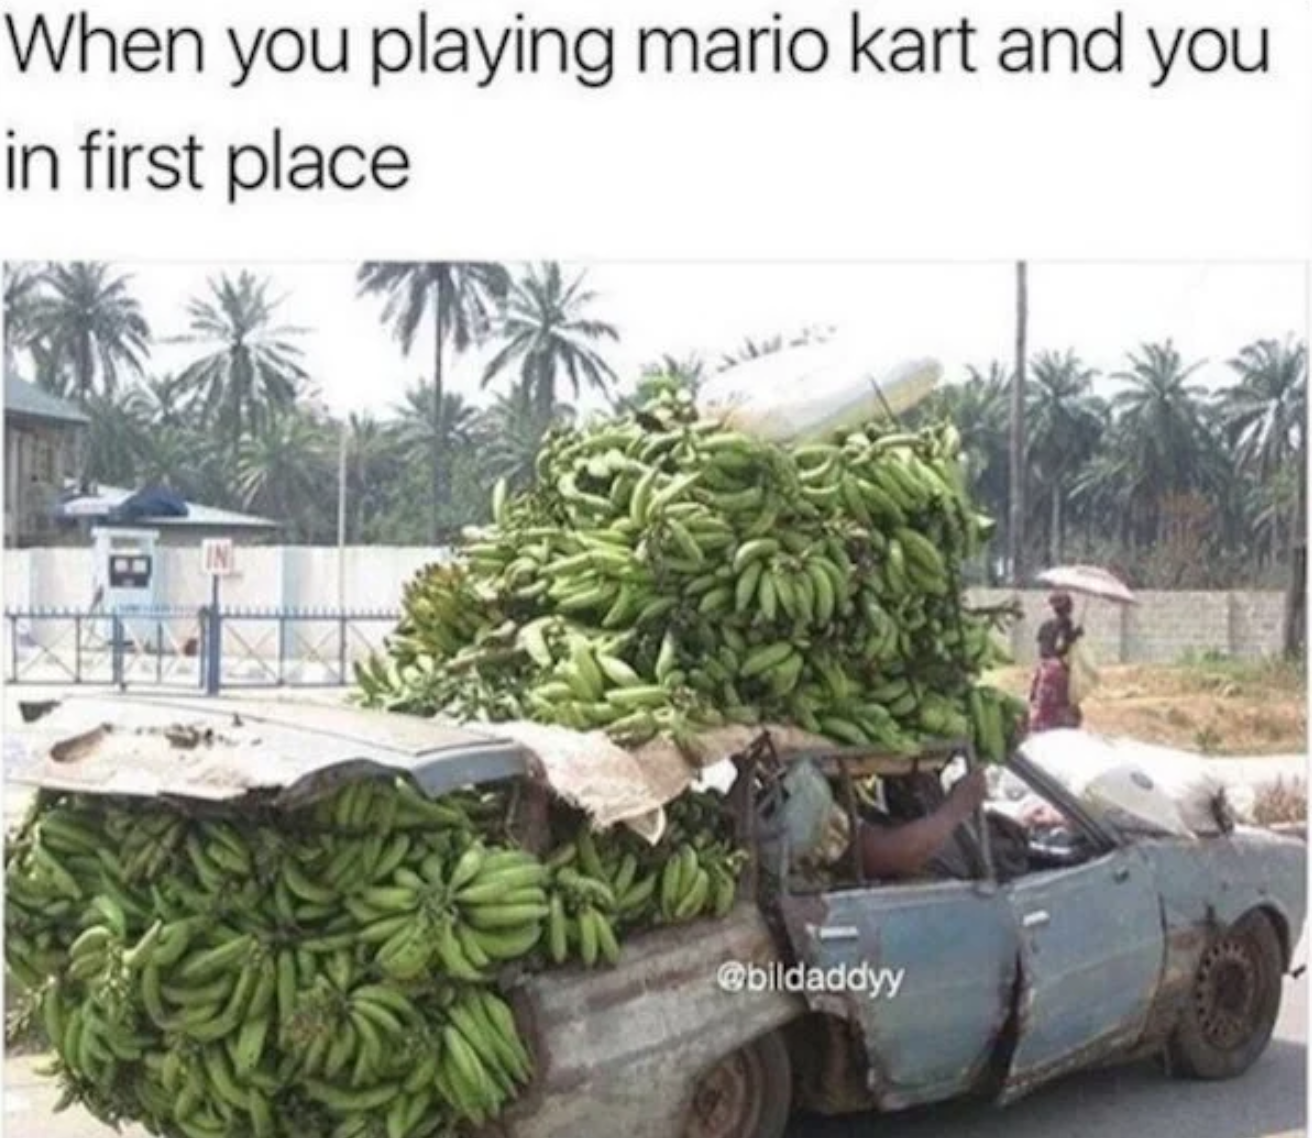 overloaded car africa - When you playing mario kart and you in first place